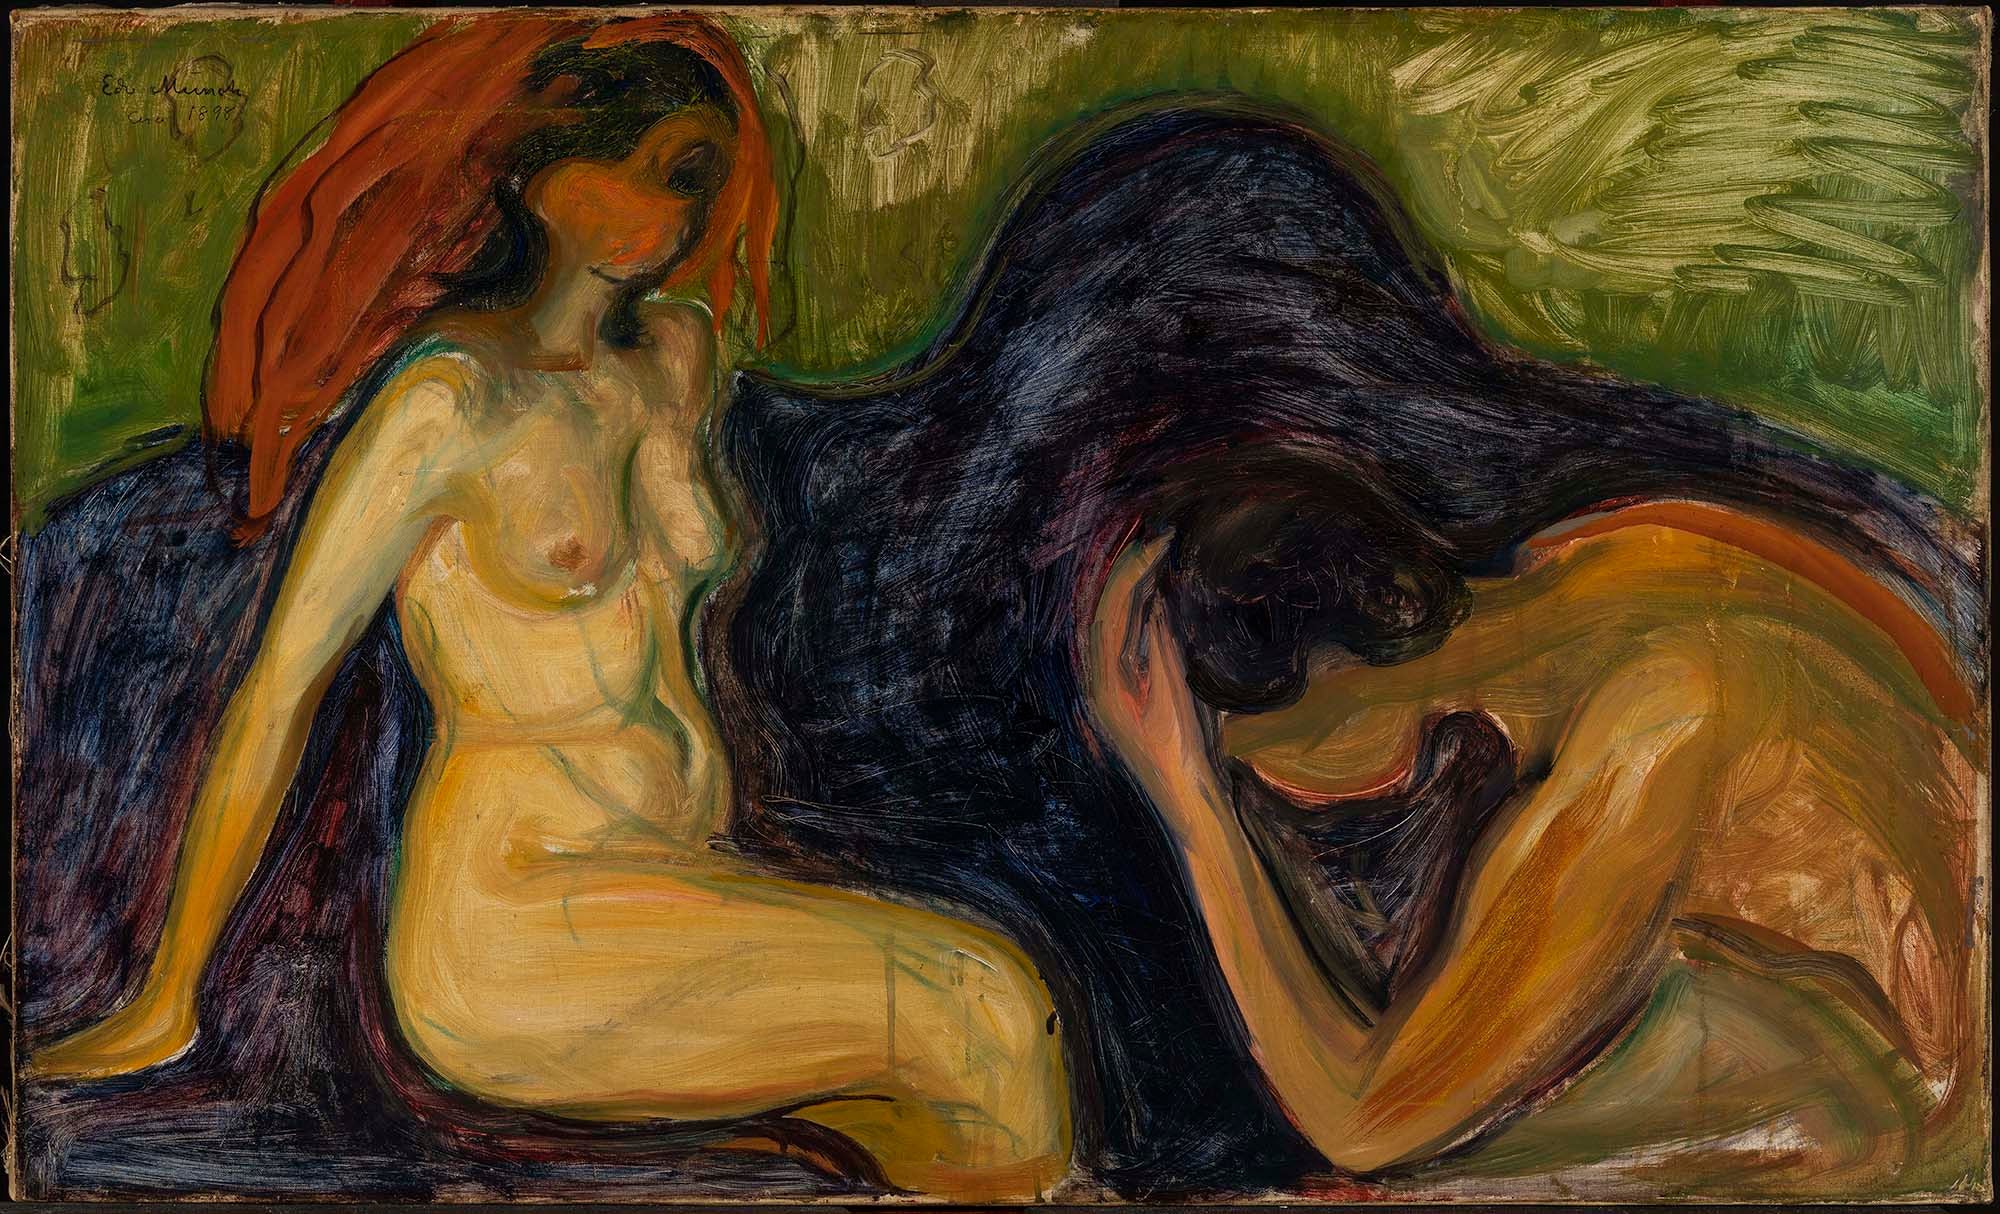 ‘Man and Woman’ (1898)